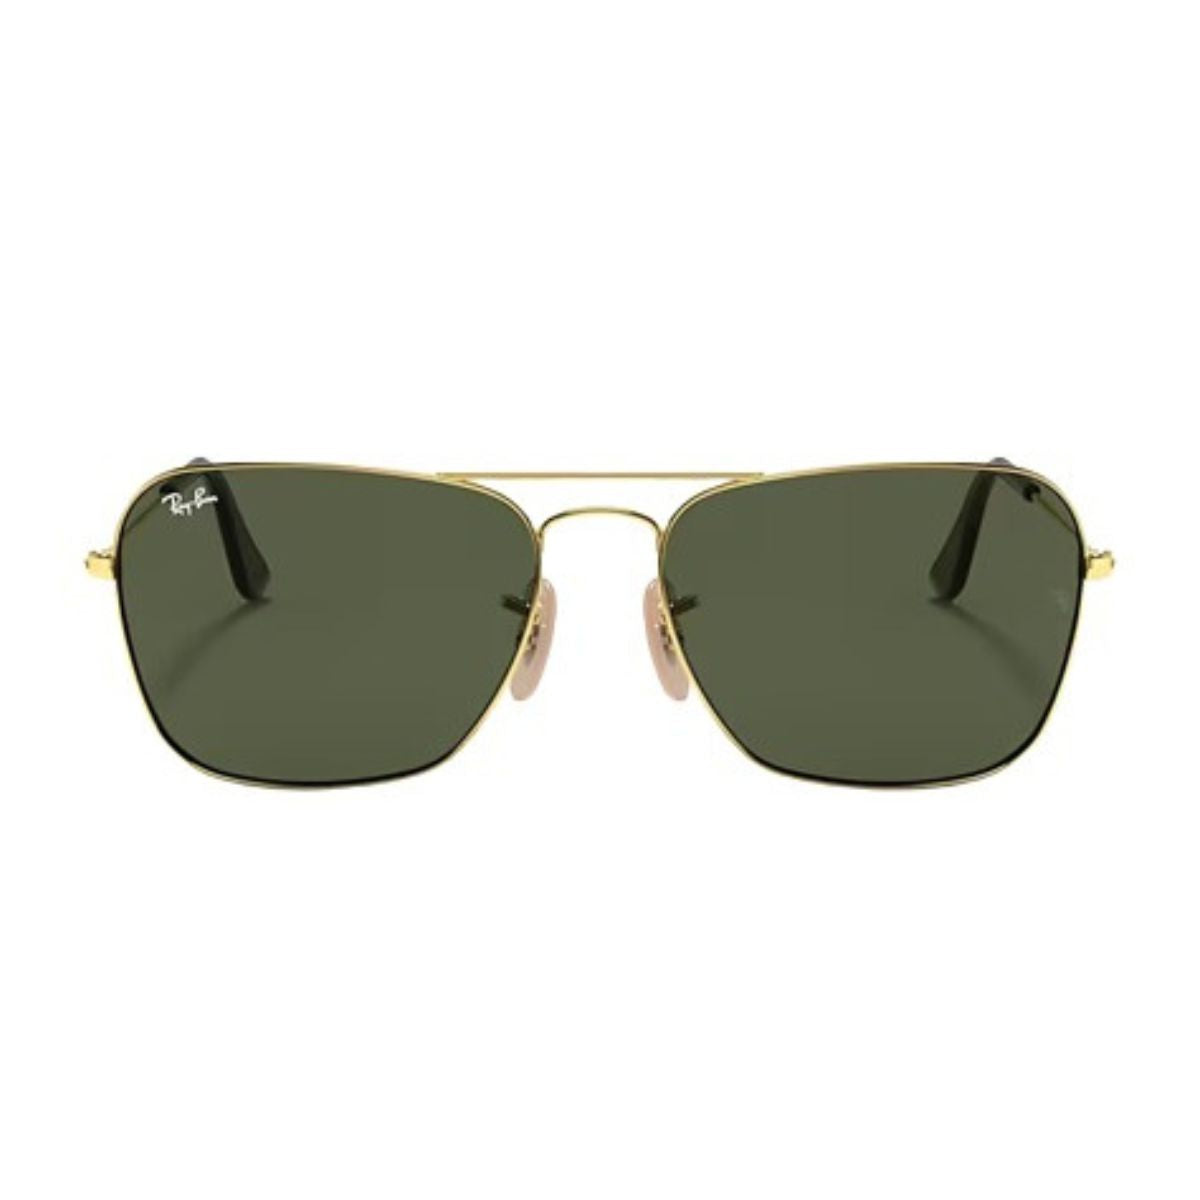 "Ray Ban 3136 001/58 Polarized Sunglass For Mens At Optorium"